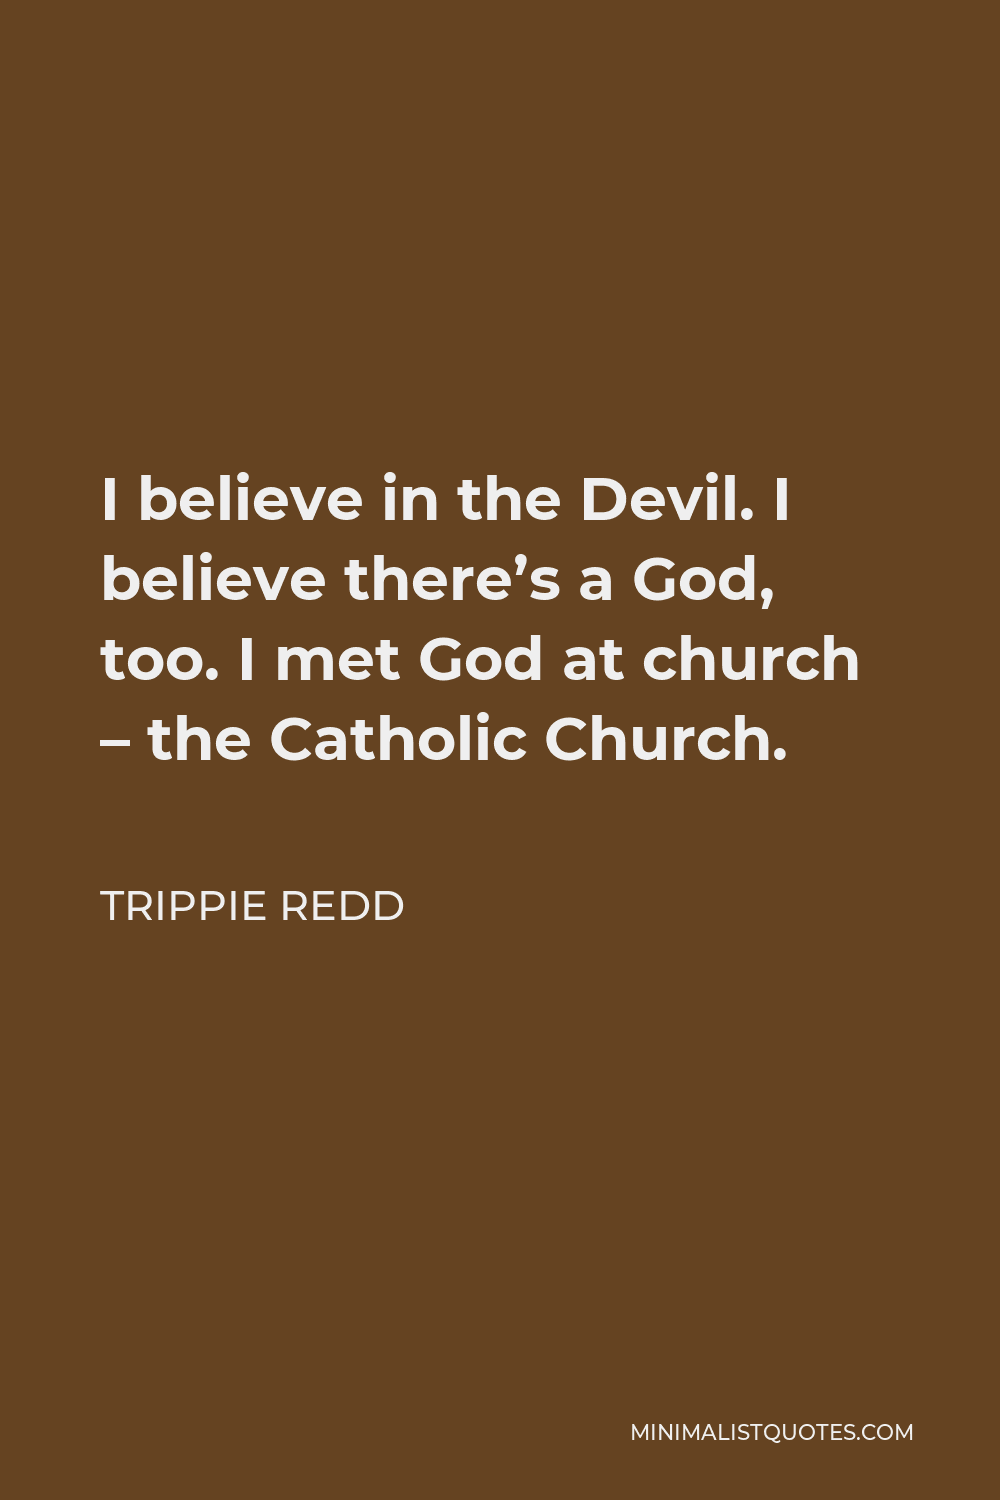 Trippie Redd Quote - I believe in the Devil. I believe there’s a God, too. I met God at church – the Catholic Church.